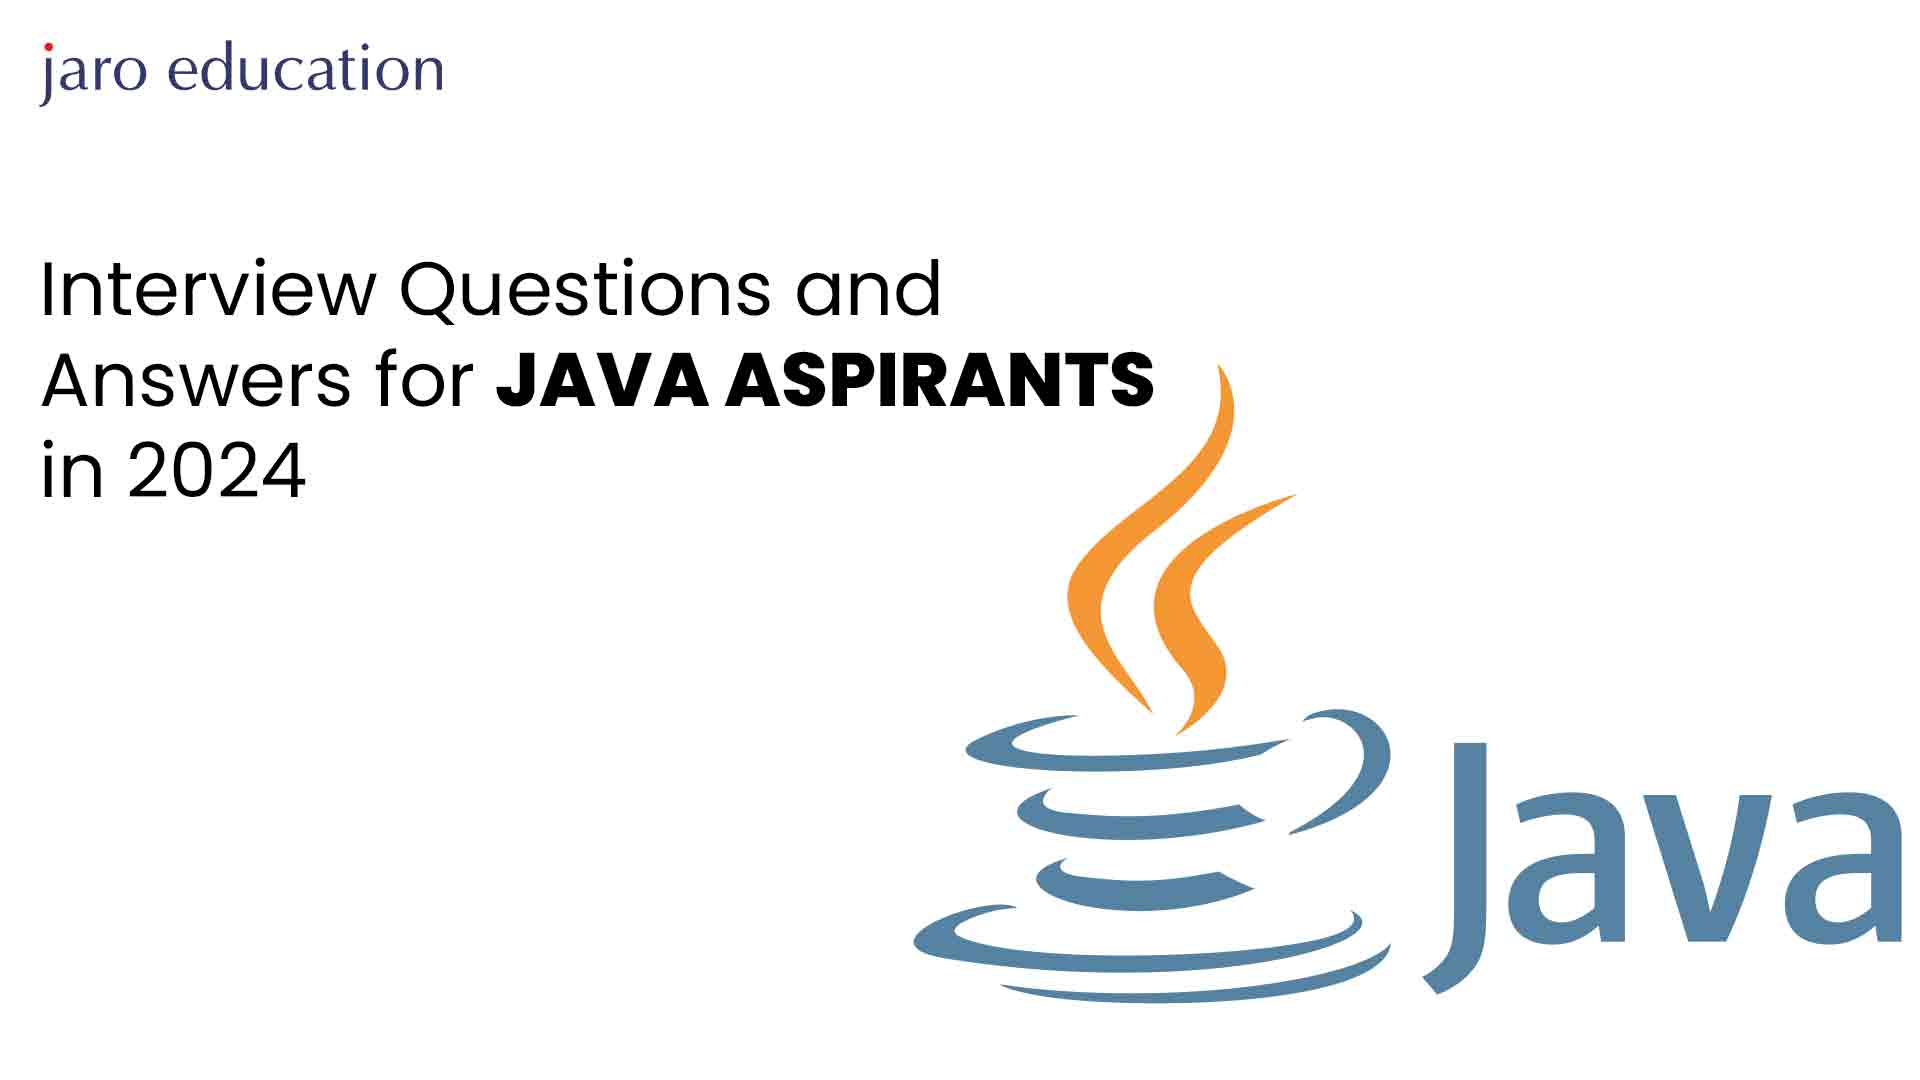 Interview Questions and Answers for Java Aspirants in 2024